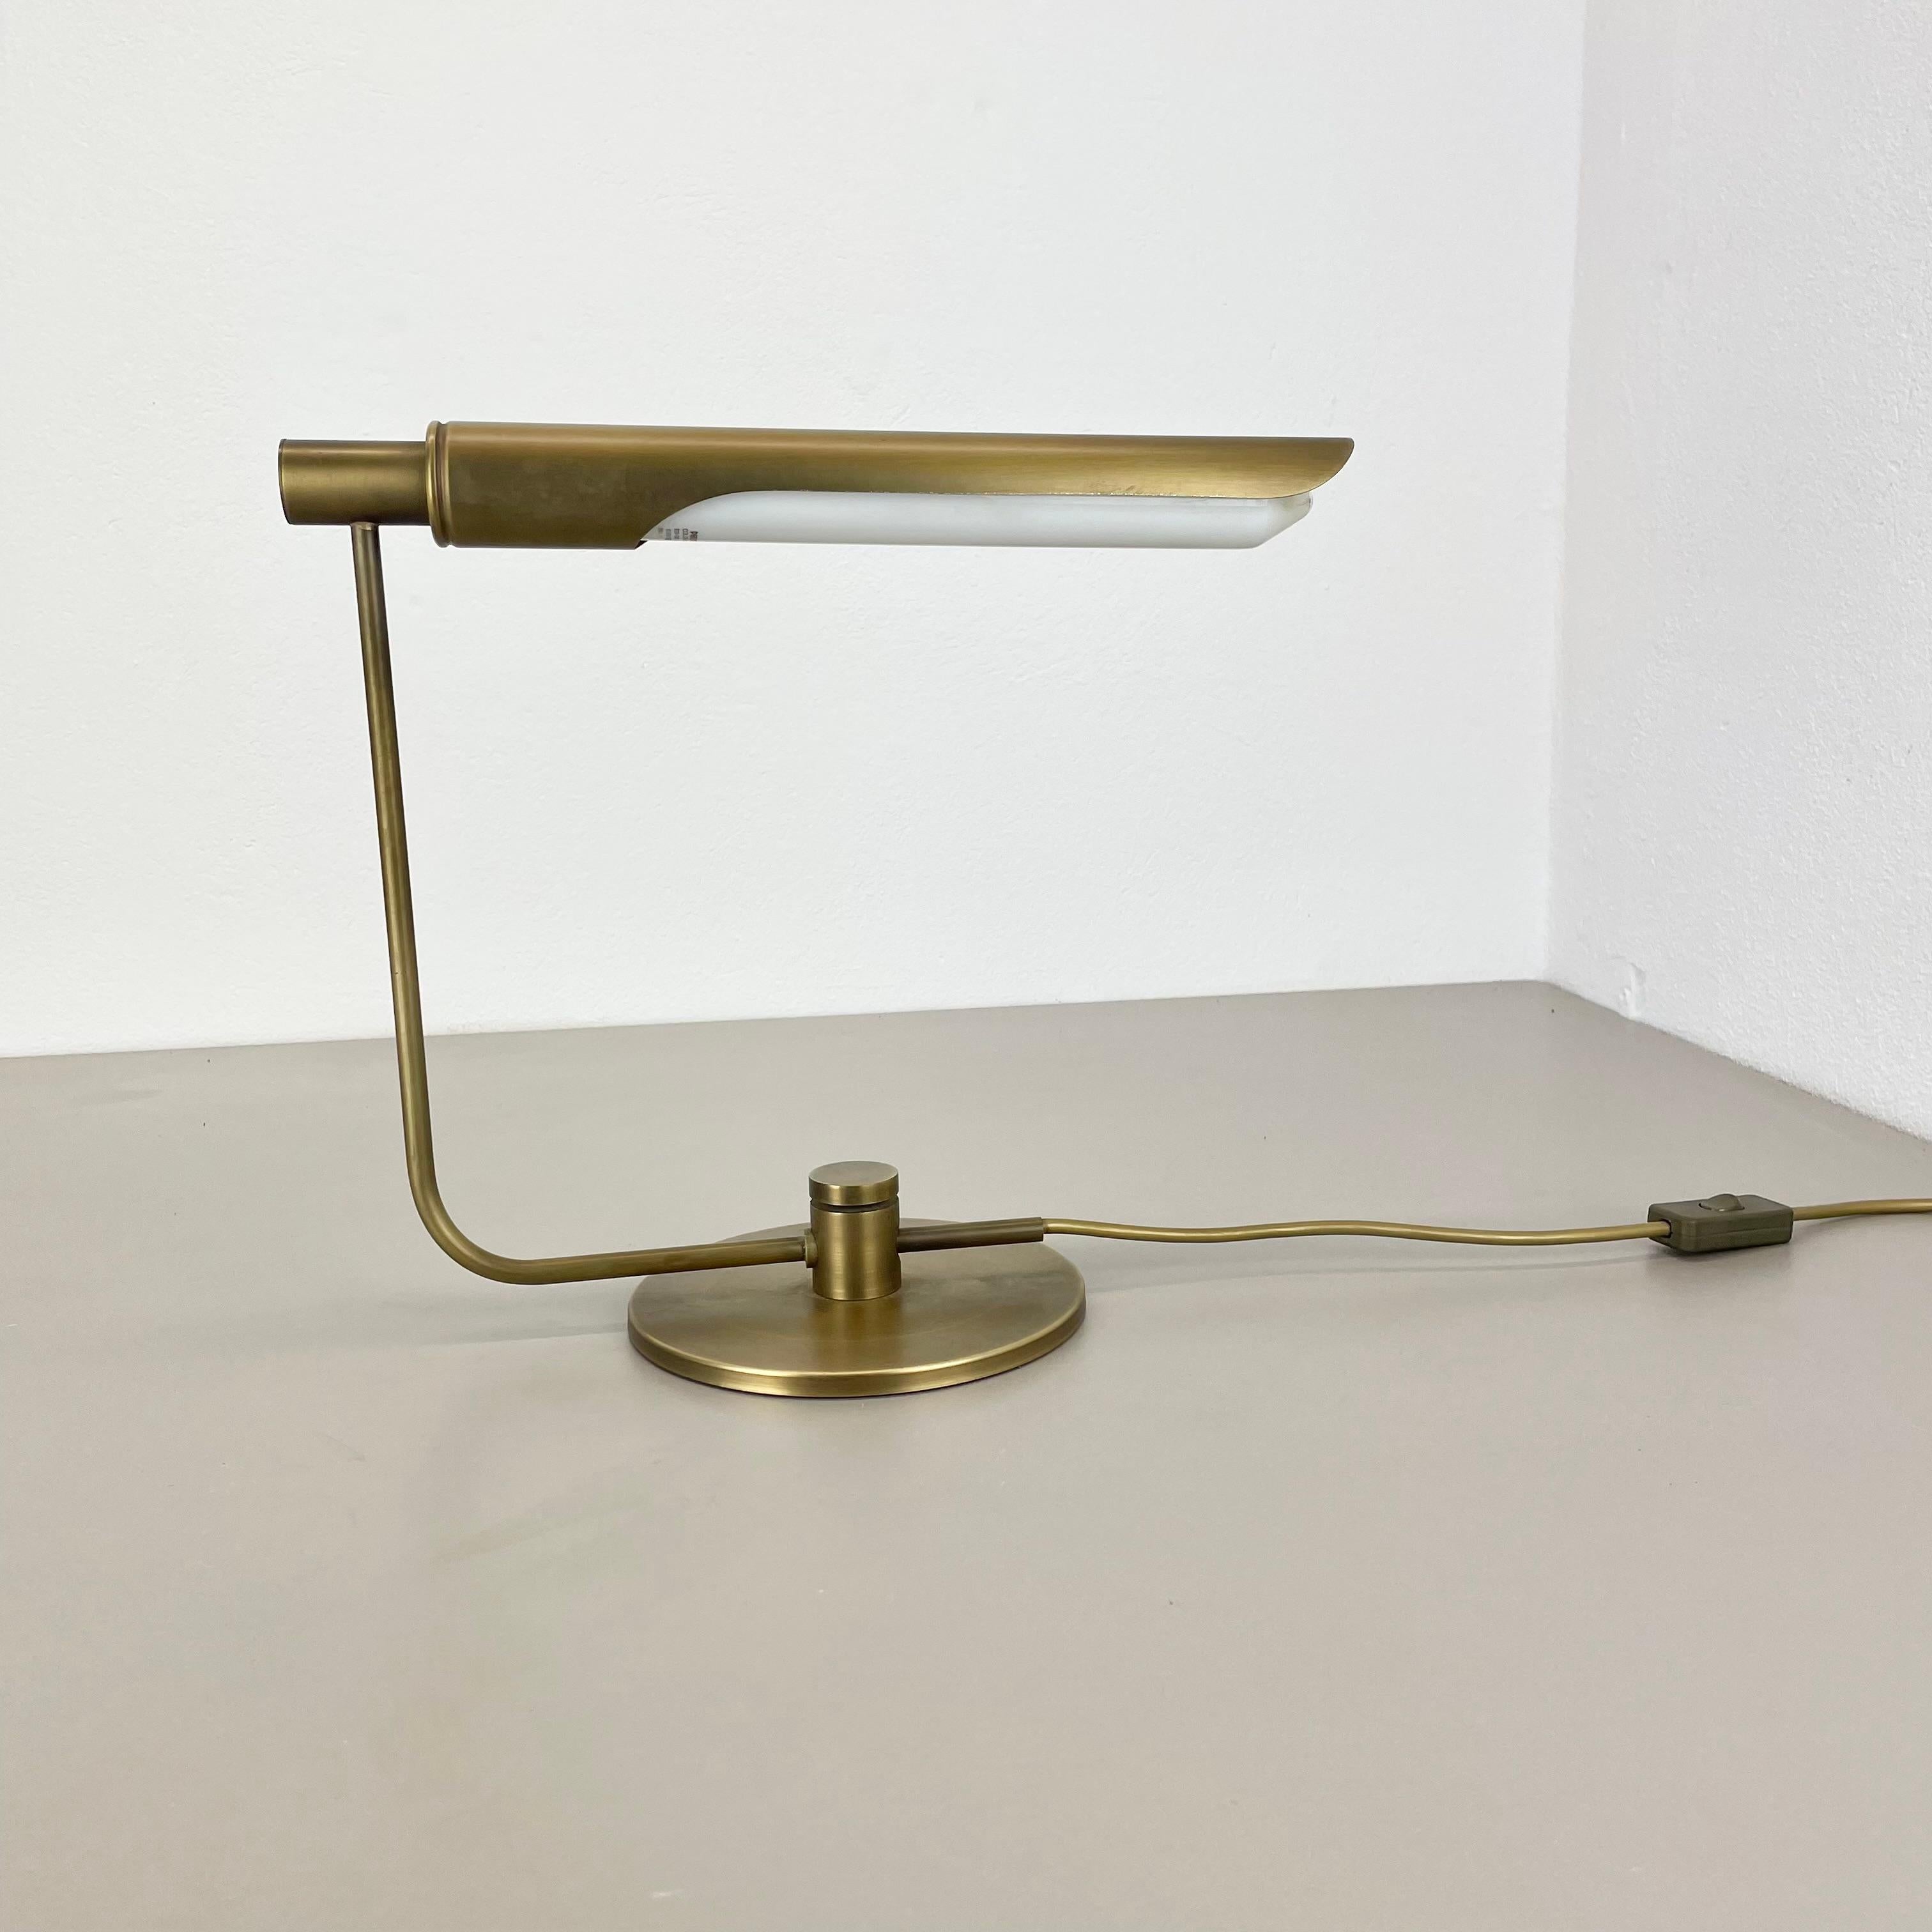 brass table light

Origin: Switzerland

Producer and Design: Rosemarie and Rico Baltensweiler attrib.

Decade: 1970s

This table light is attributed to be designed and produced by Rosemarie and Rico Baltensweiler in Switzerland in the 1970s. the